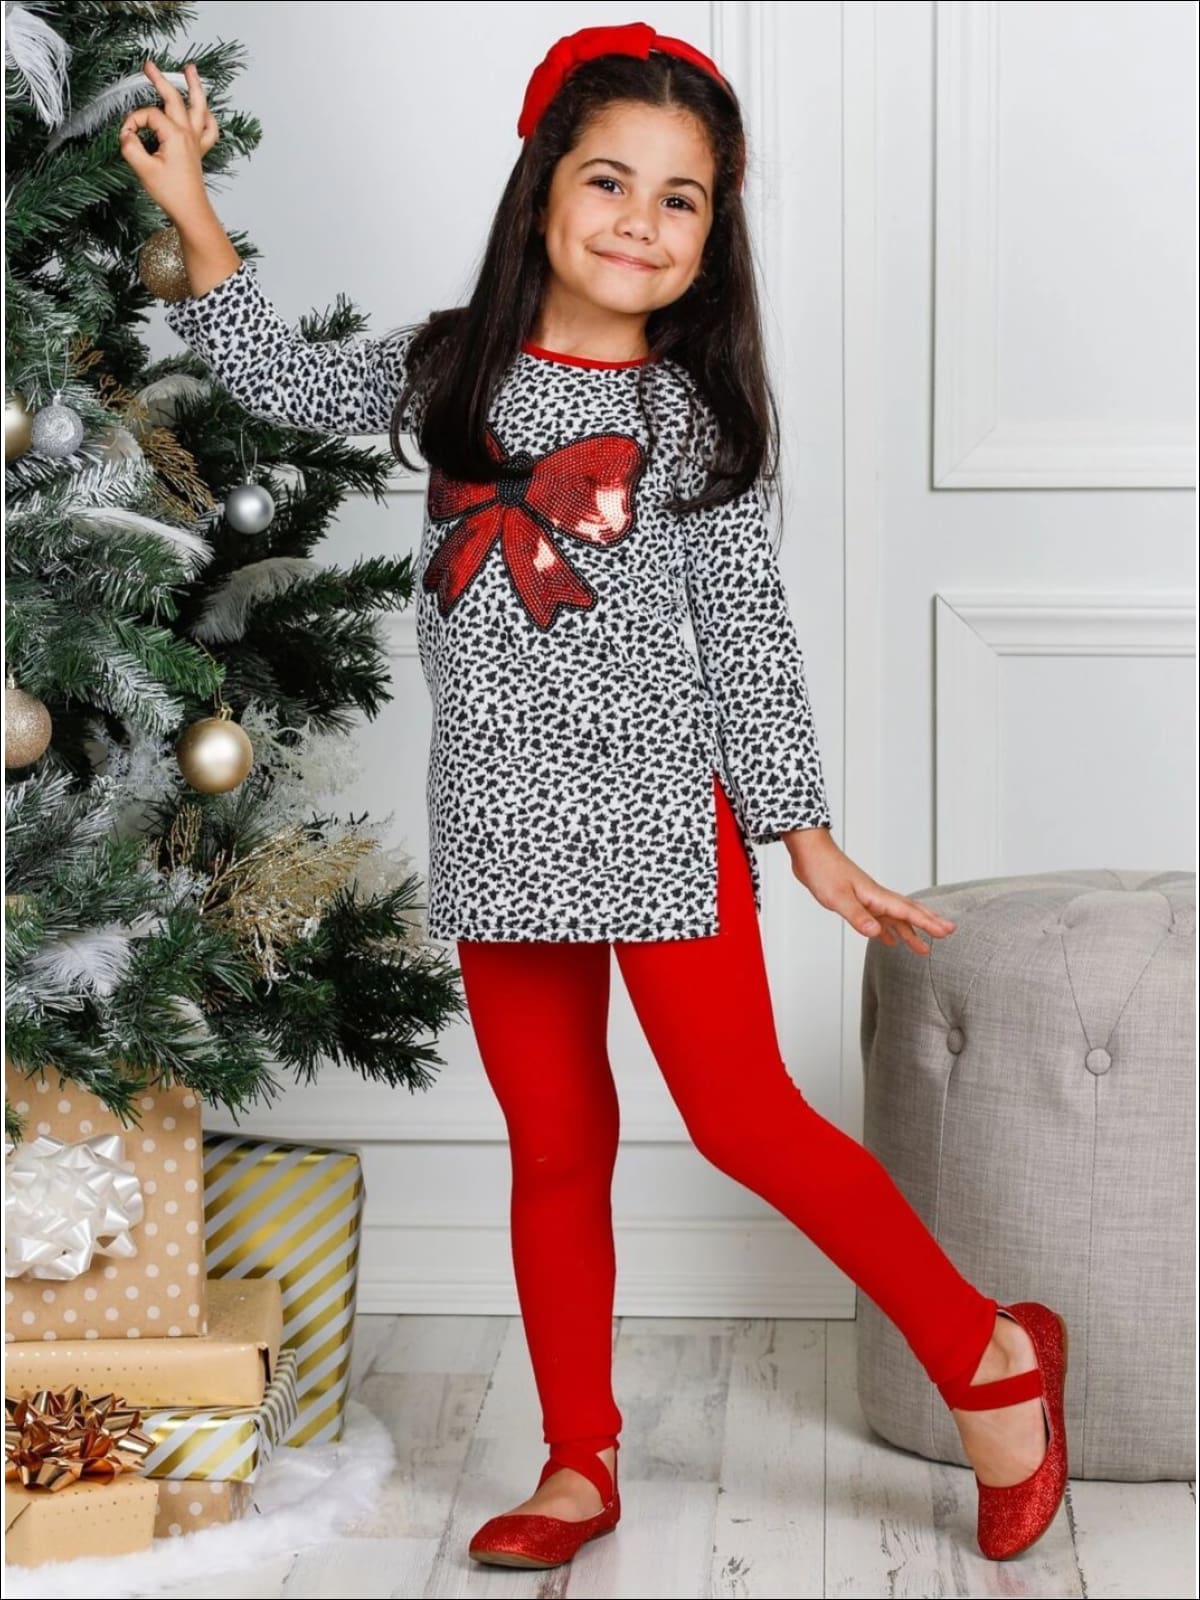 https://cdn.shopify.com/s/files/1/0996/1812/products/girls-long-sleeve-sequin-bow-applique-tunic-leggings-set-20-39-99-40-59-10y12y-2203-2t3t-fall-casual-mia-belle-baby_523.jpg